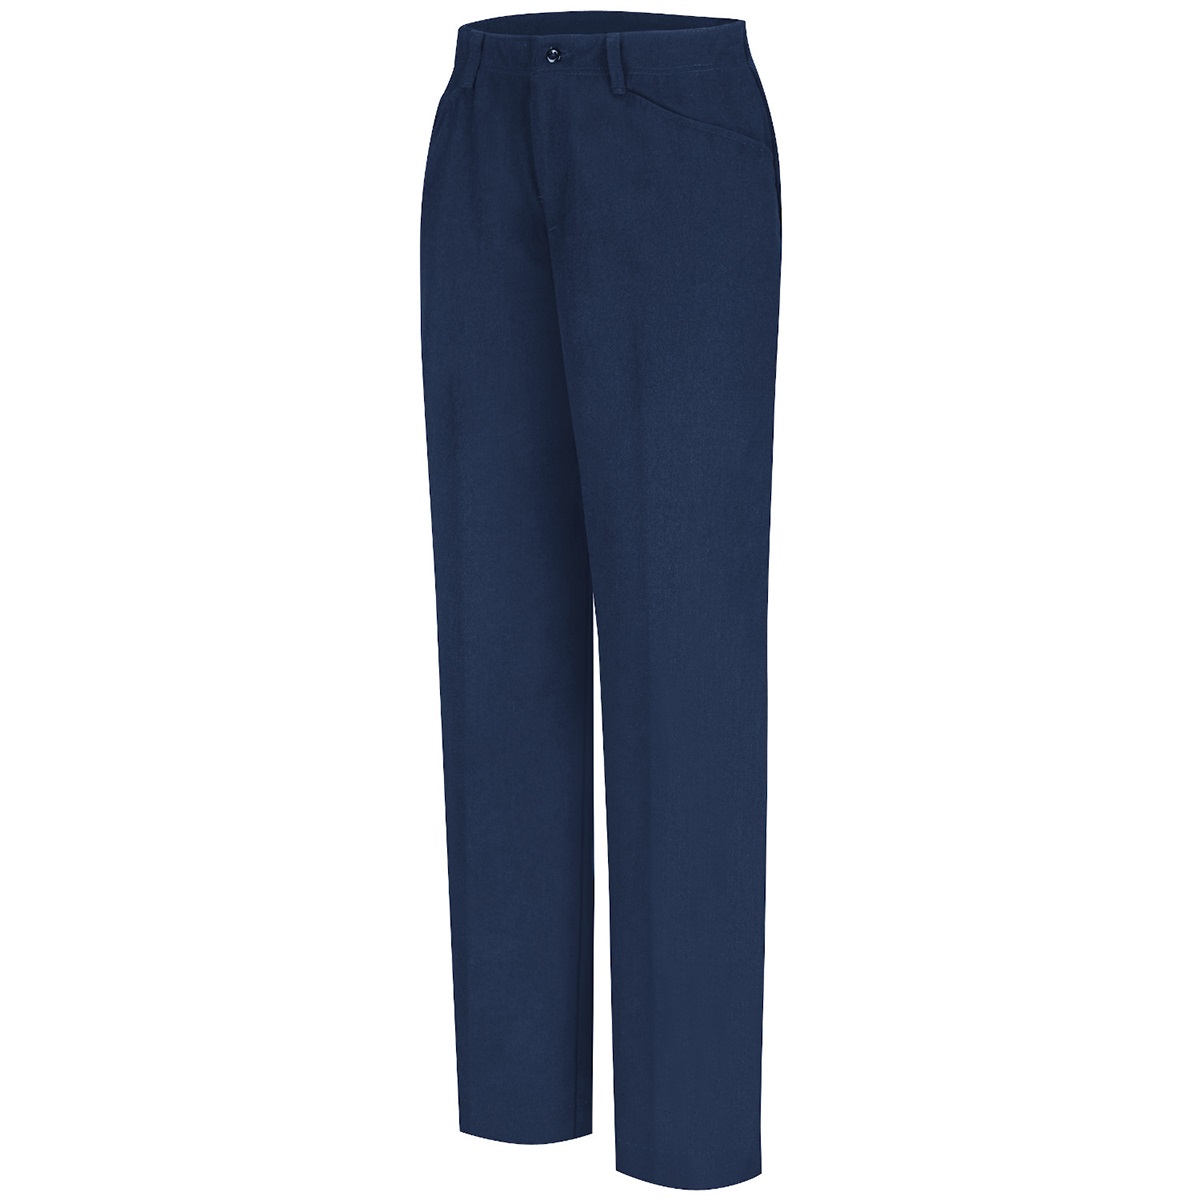 Bulwark Cool Touch FR Women's Work Pant in Navy